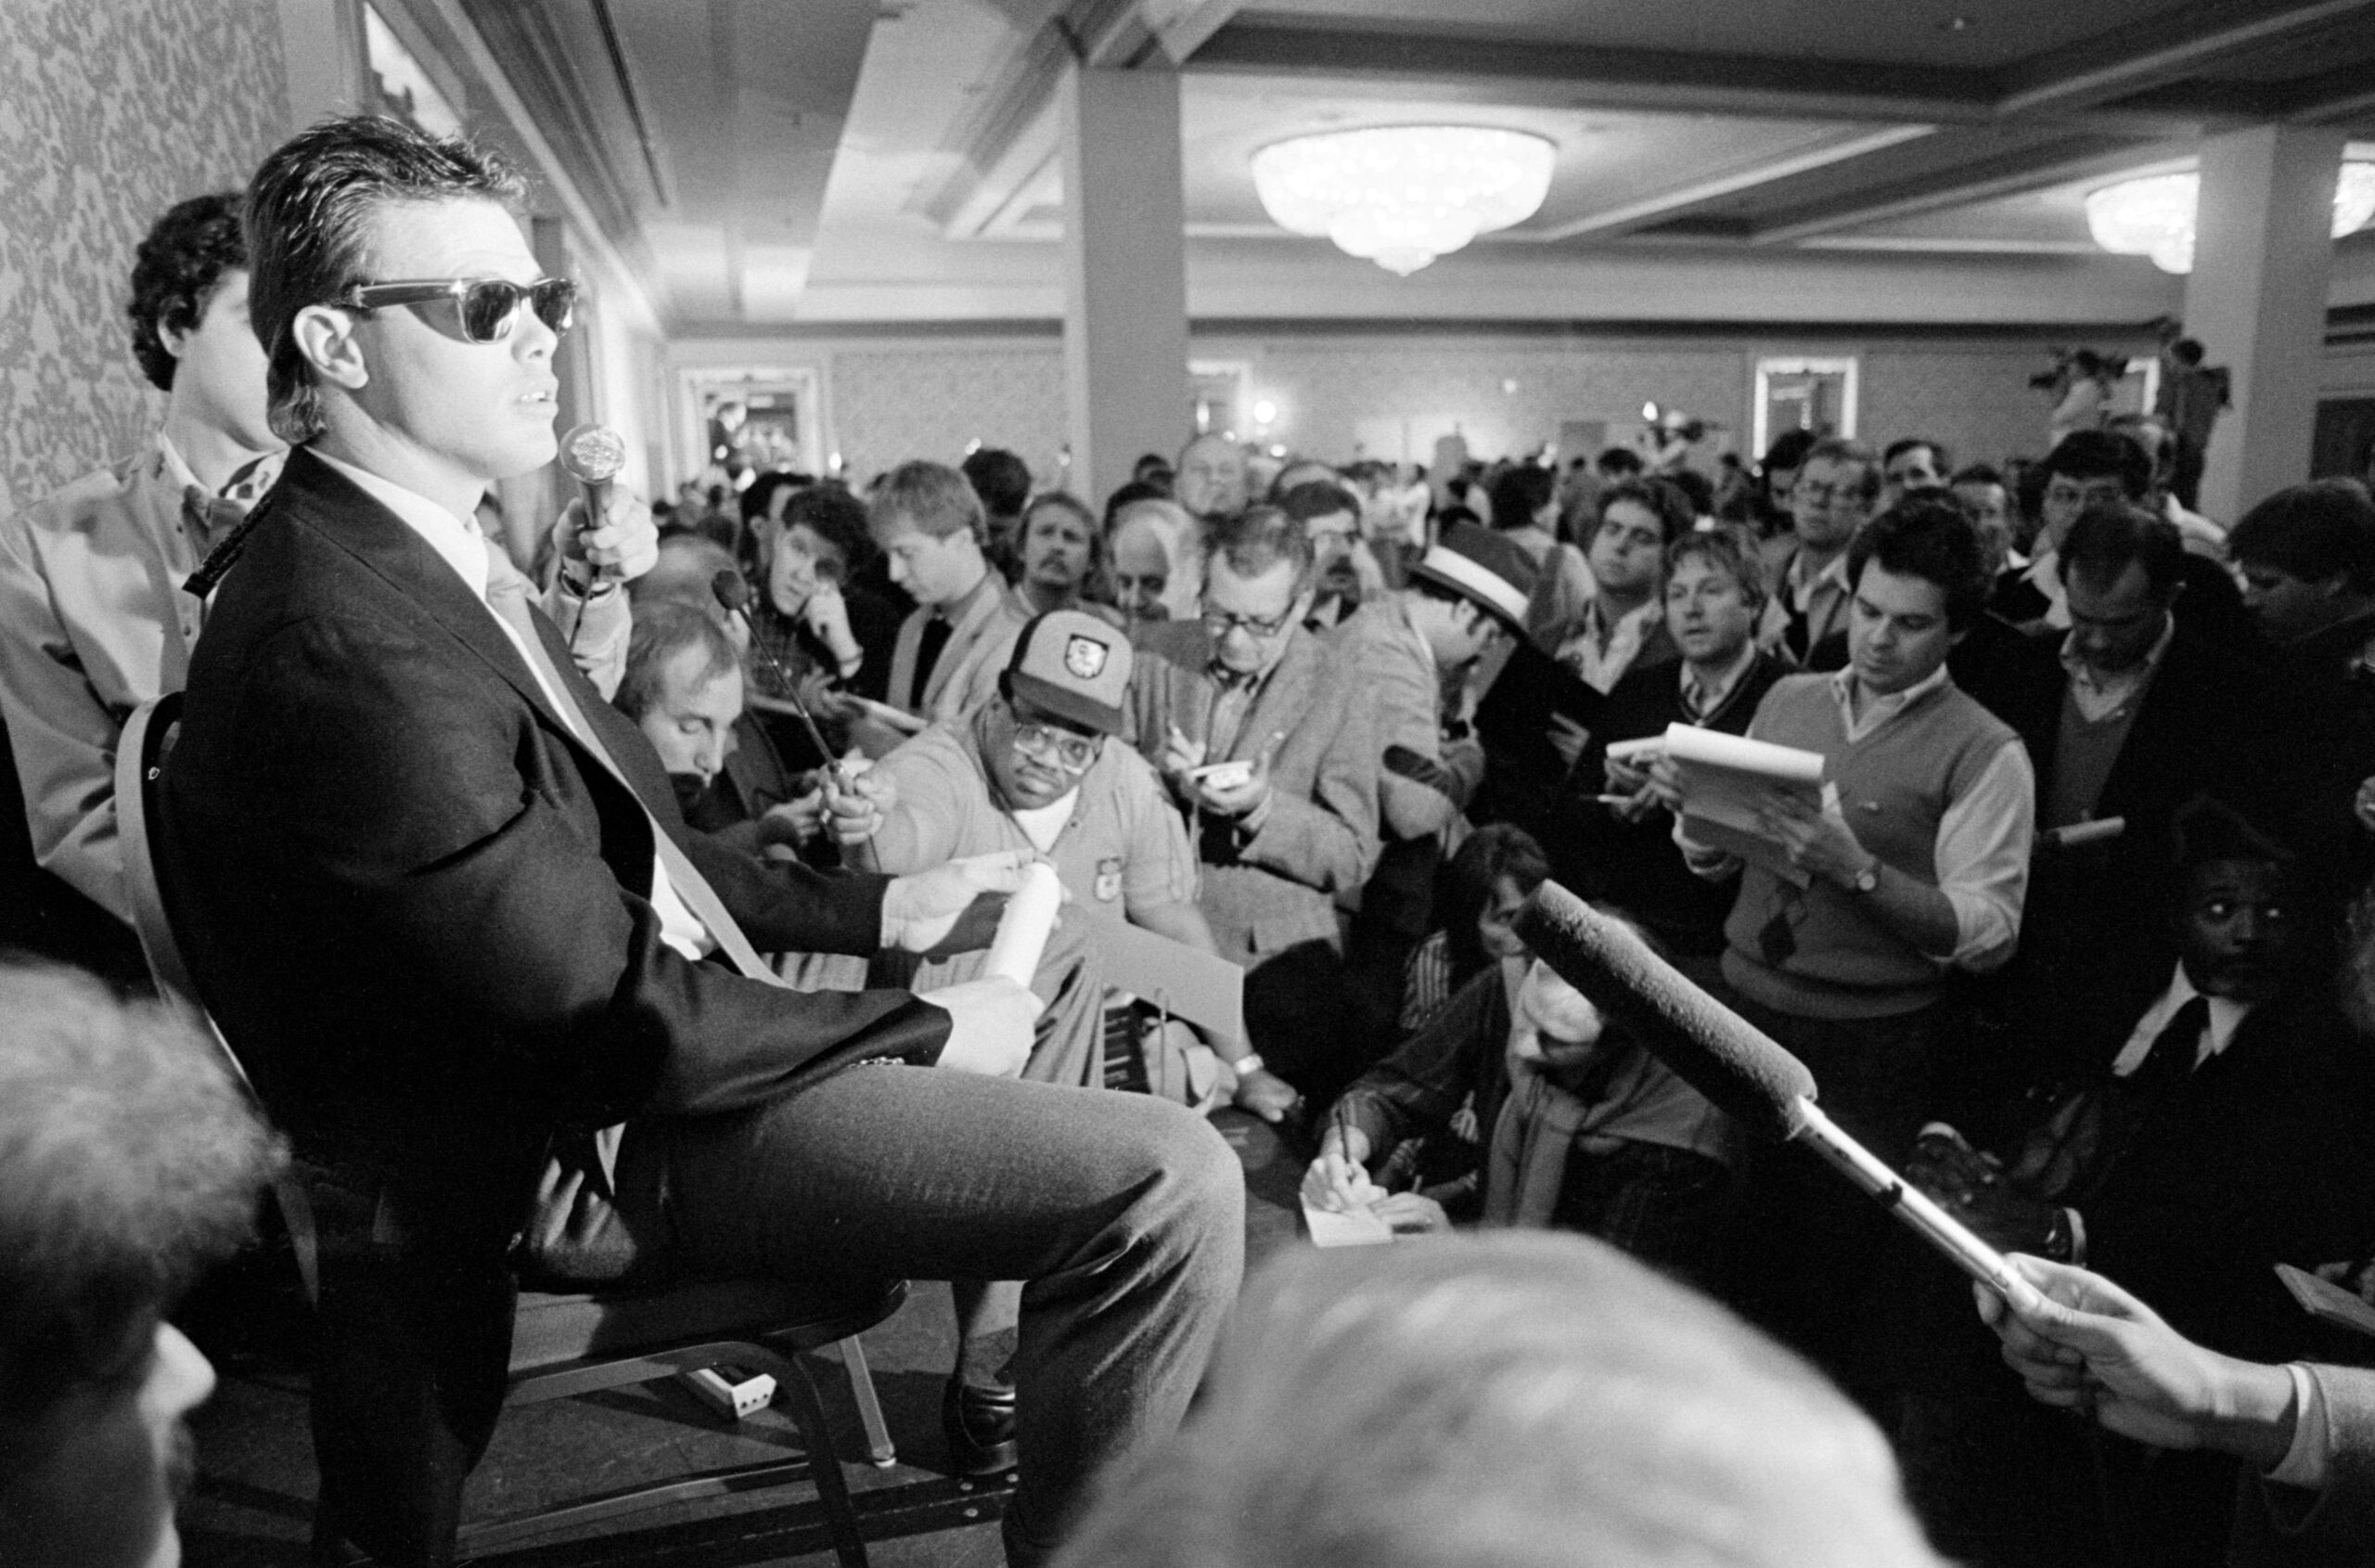 Football injuries nearly destroyed Jim McMahon. Somehow, he keeps coming back